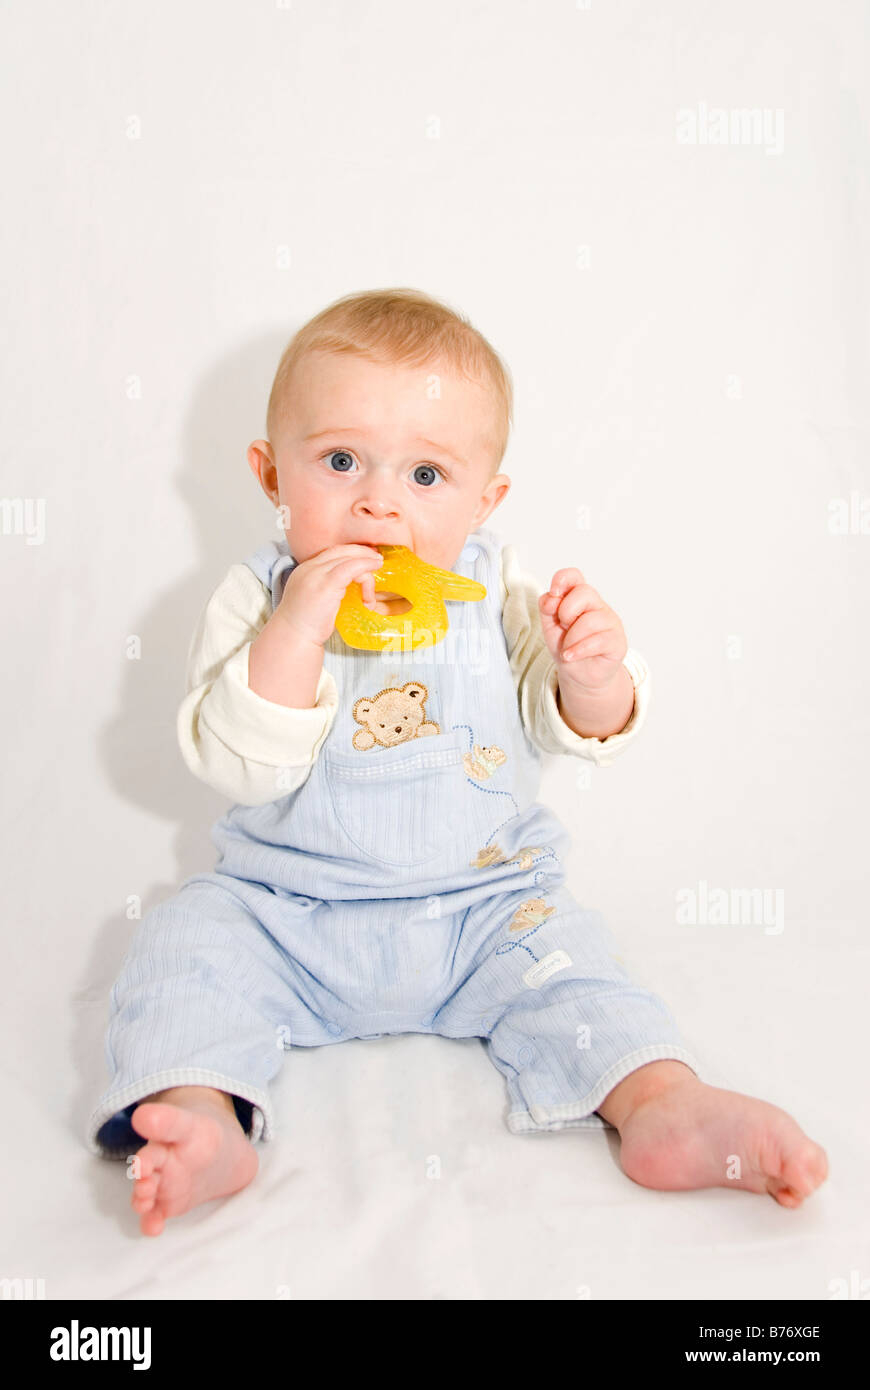 Full Length Portrait of Baby Boy Sitting Up Chewing on Yellow Teething Toy Cut Out on White Stock Photo